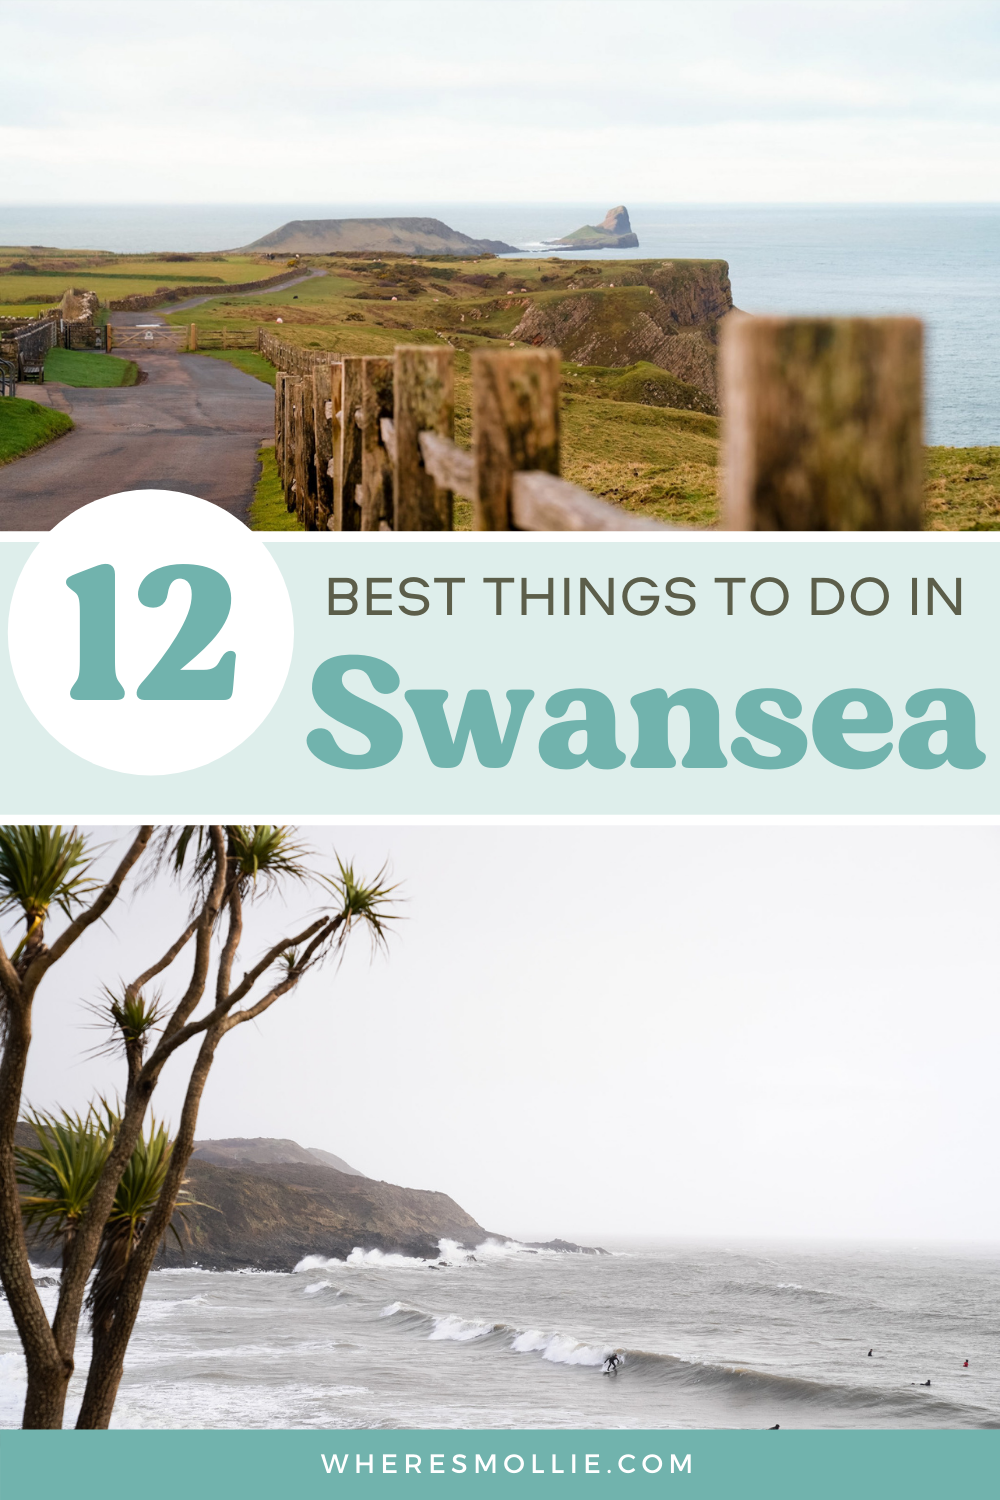 The best things to do in Swansea Bay